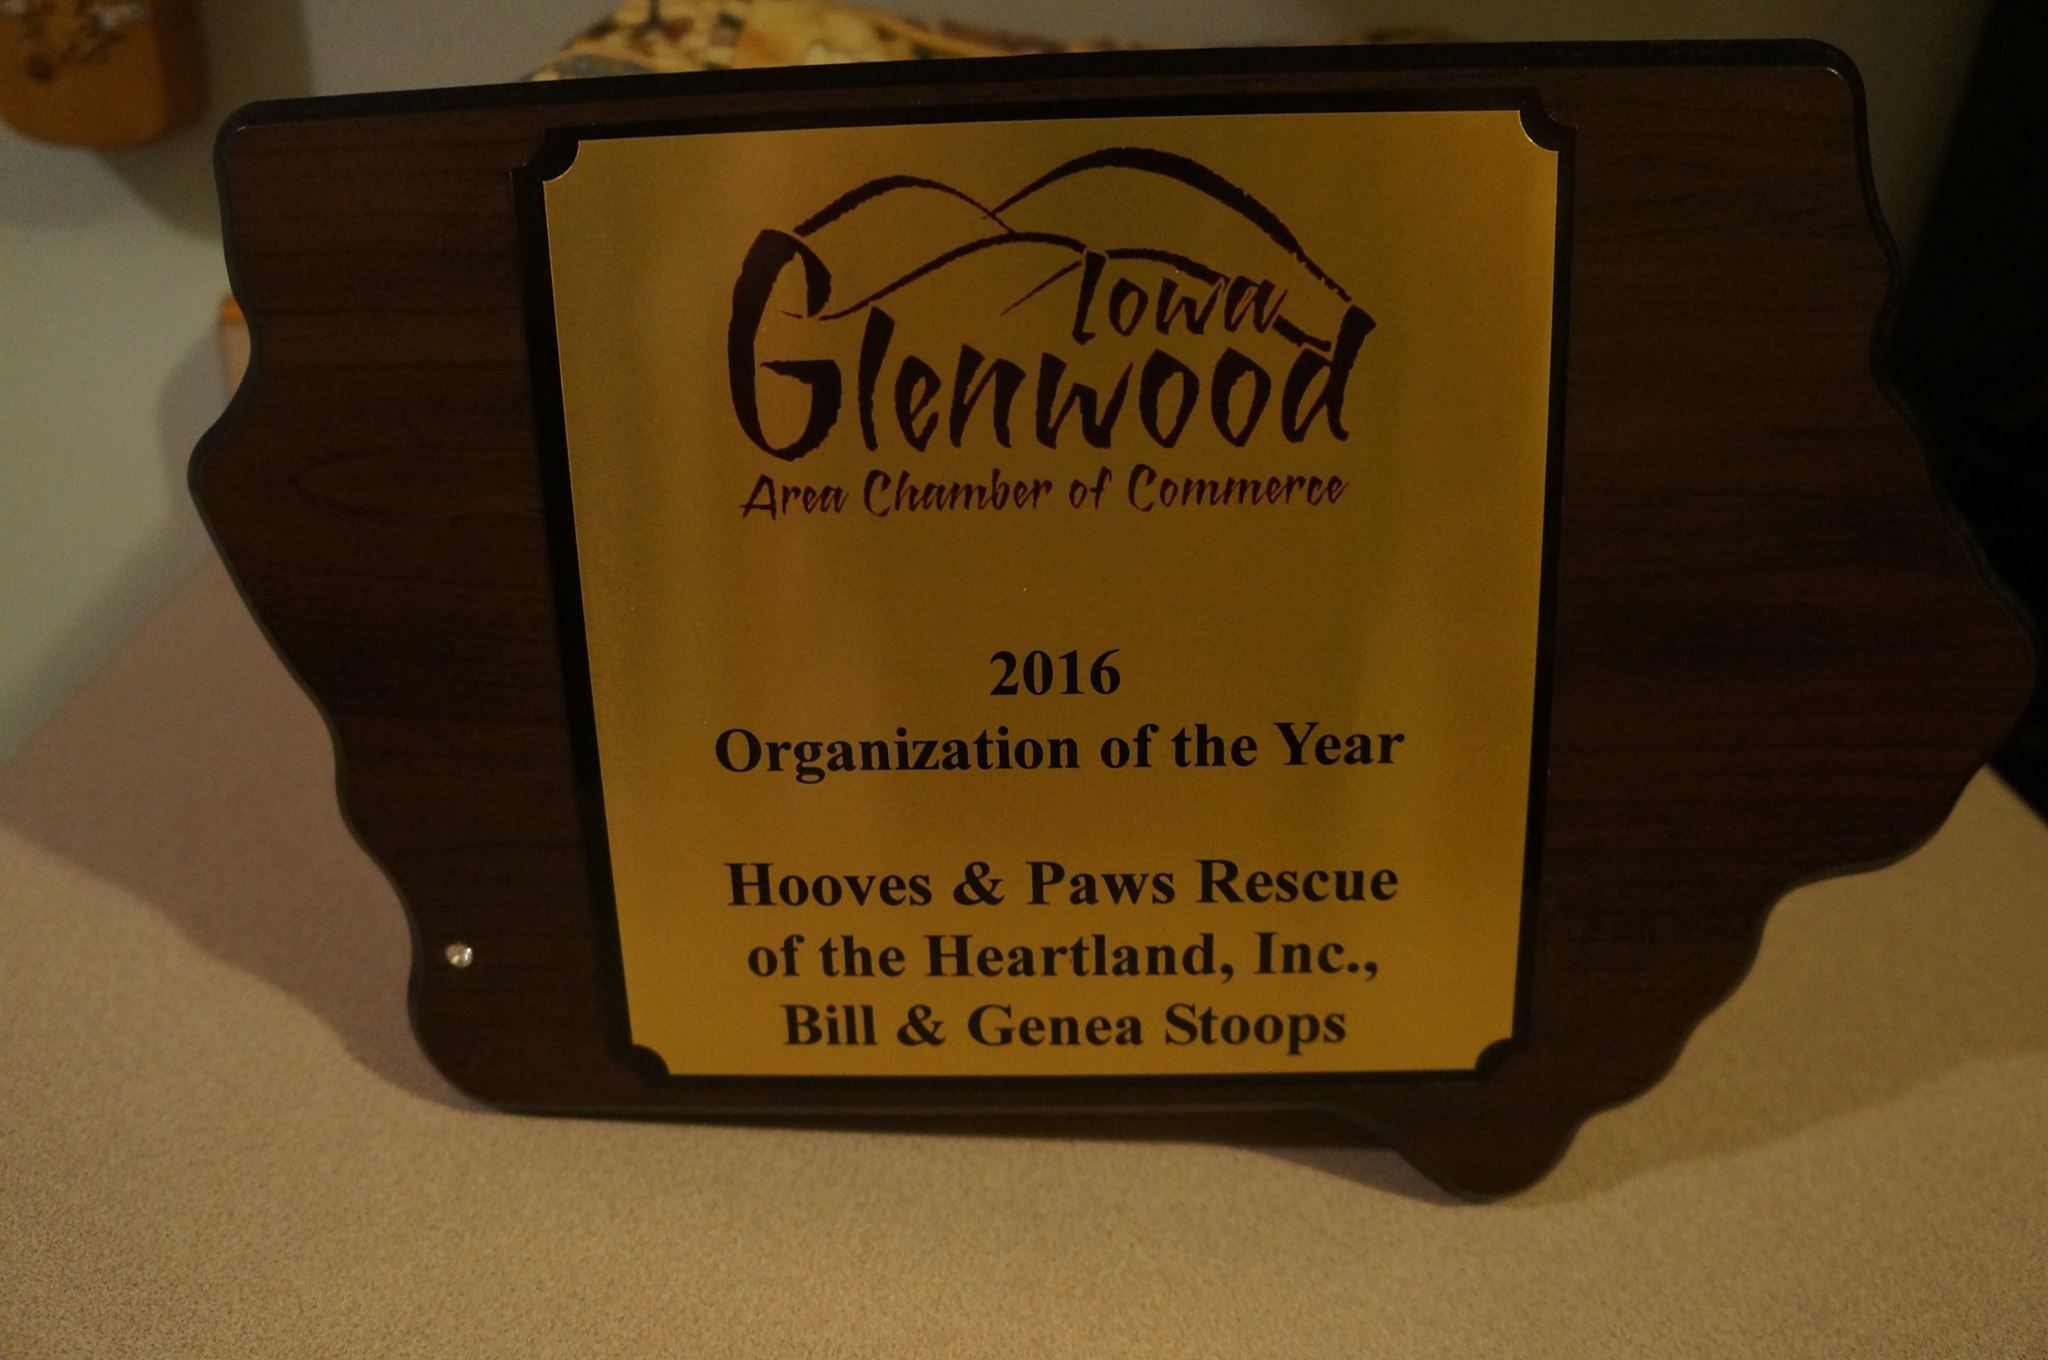 GREAT NEWS!! Hooves & Paws Rescue of the Heartland was awarded 